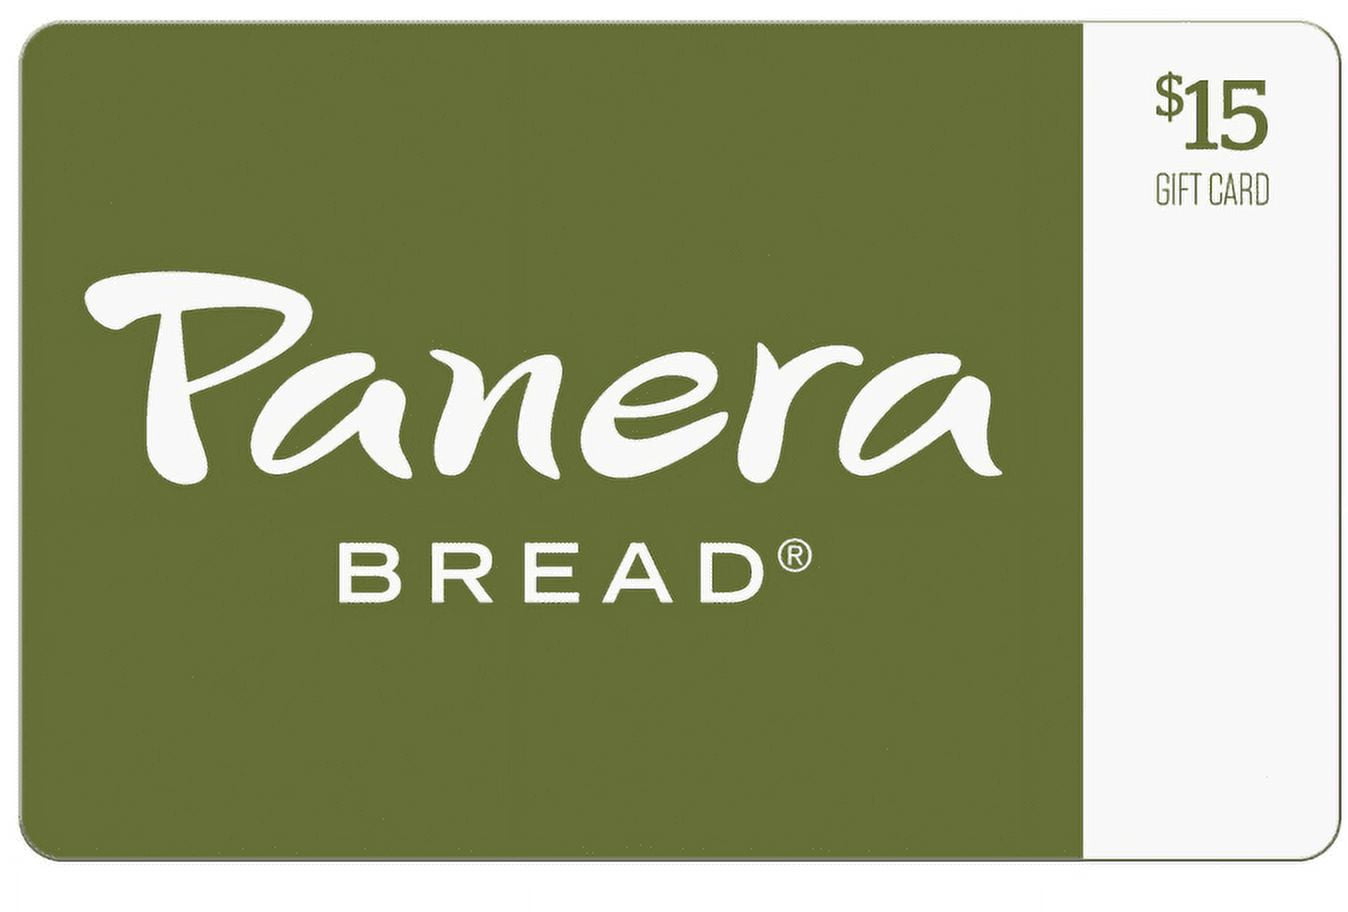 T-Mobile Tuesdays will give away more than , Panera Bread gift cards next week - TmoNews